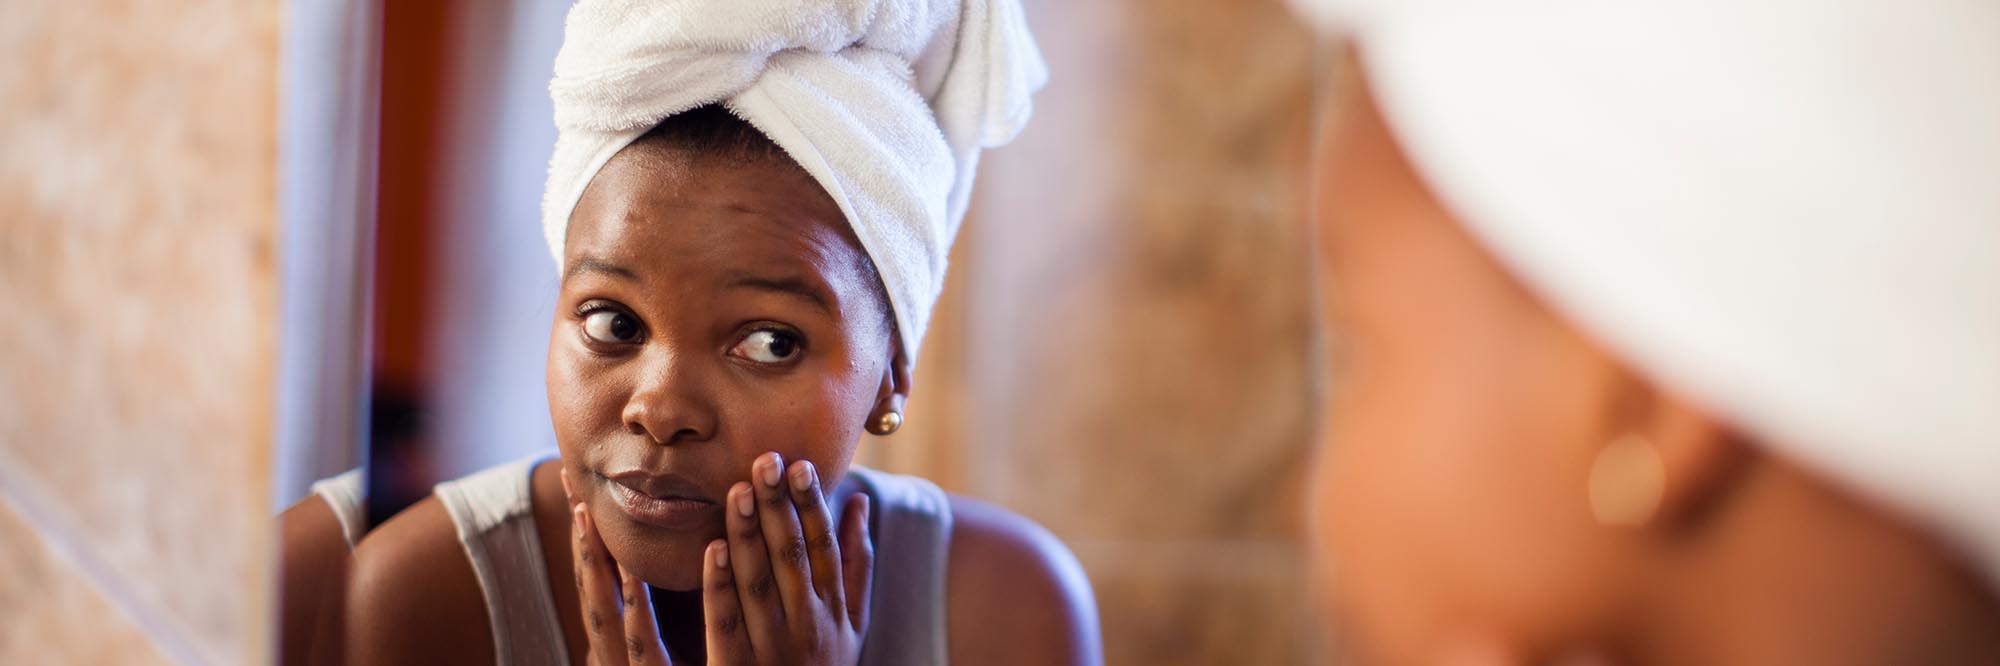 Are stress and anxiety causing your skin conditions?